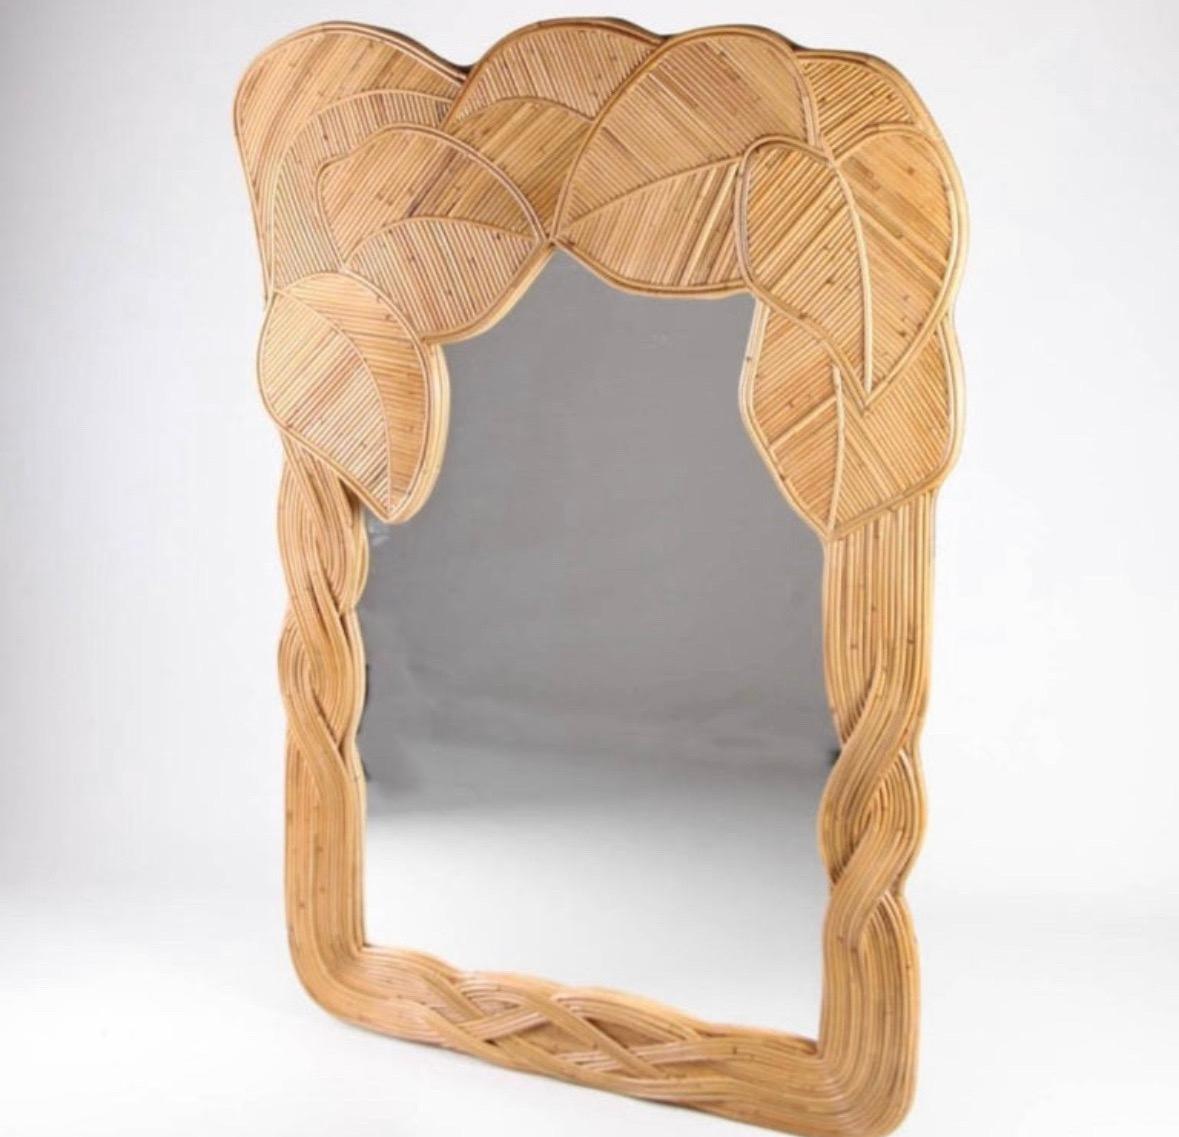 Amazing and large rattan mirror with foliages and intertwined vines patterns.
Very decorative, this mirror is the result of a high quality all hand made work.
Beautiful patina, excellent condition, very unique.